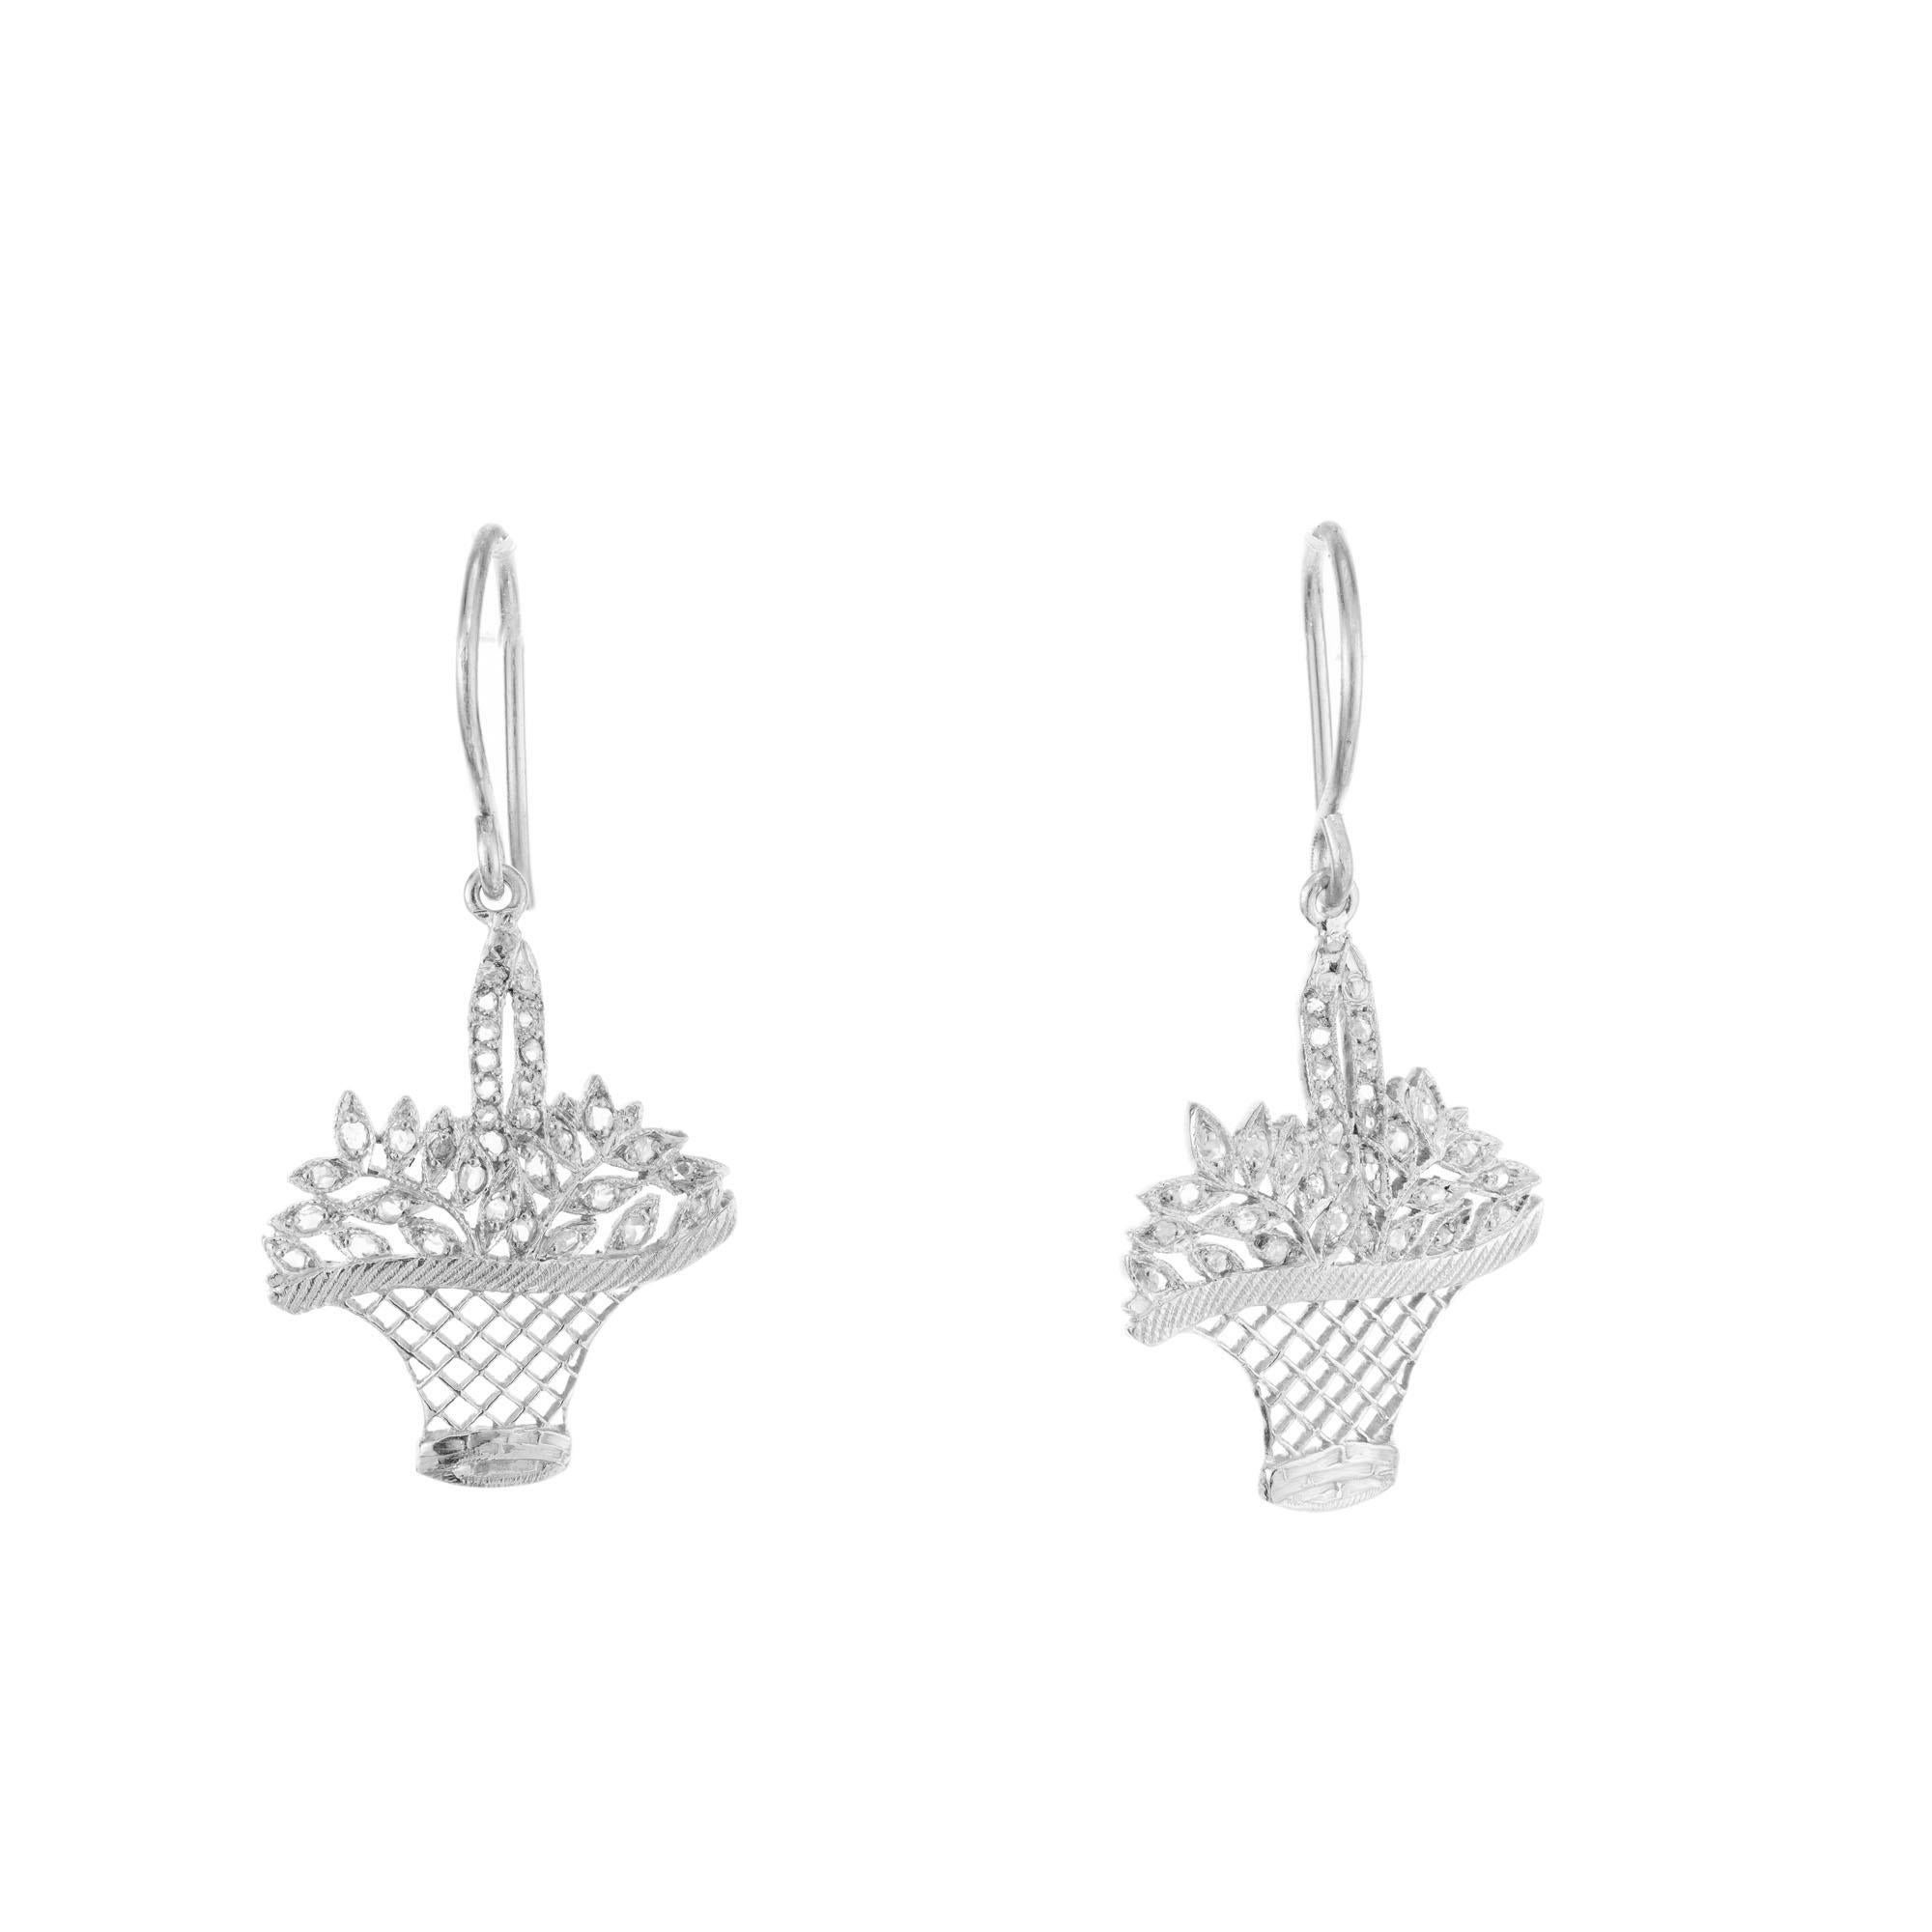 Vintage 1900's handmade basket dangle earrings set with 62 rose cut diamonds on simple wire hooks

62 round rose cut diamonds, H-I SI-I approx. .25cts
Platinum 
4.9 grams
Top to bottom: 34.6mm or 1 1/3 Inch
Width: 18.6mm or .75 Inch
Depth or